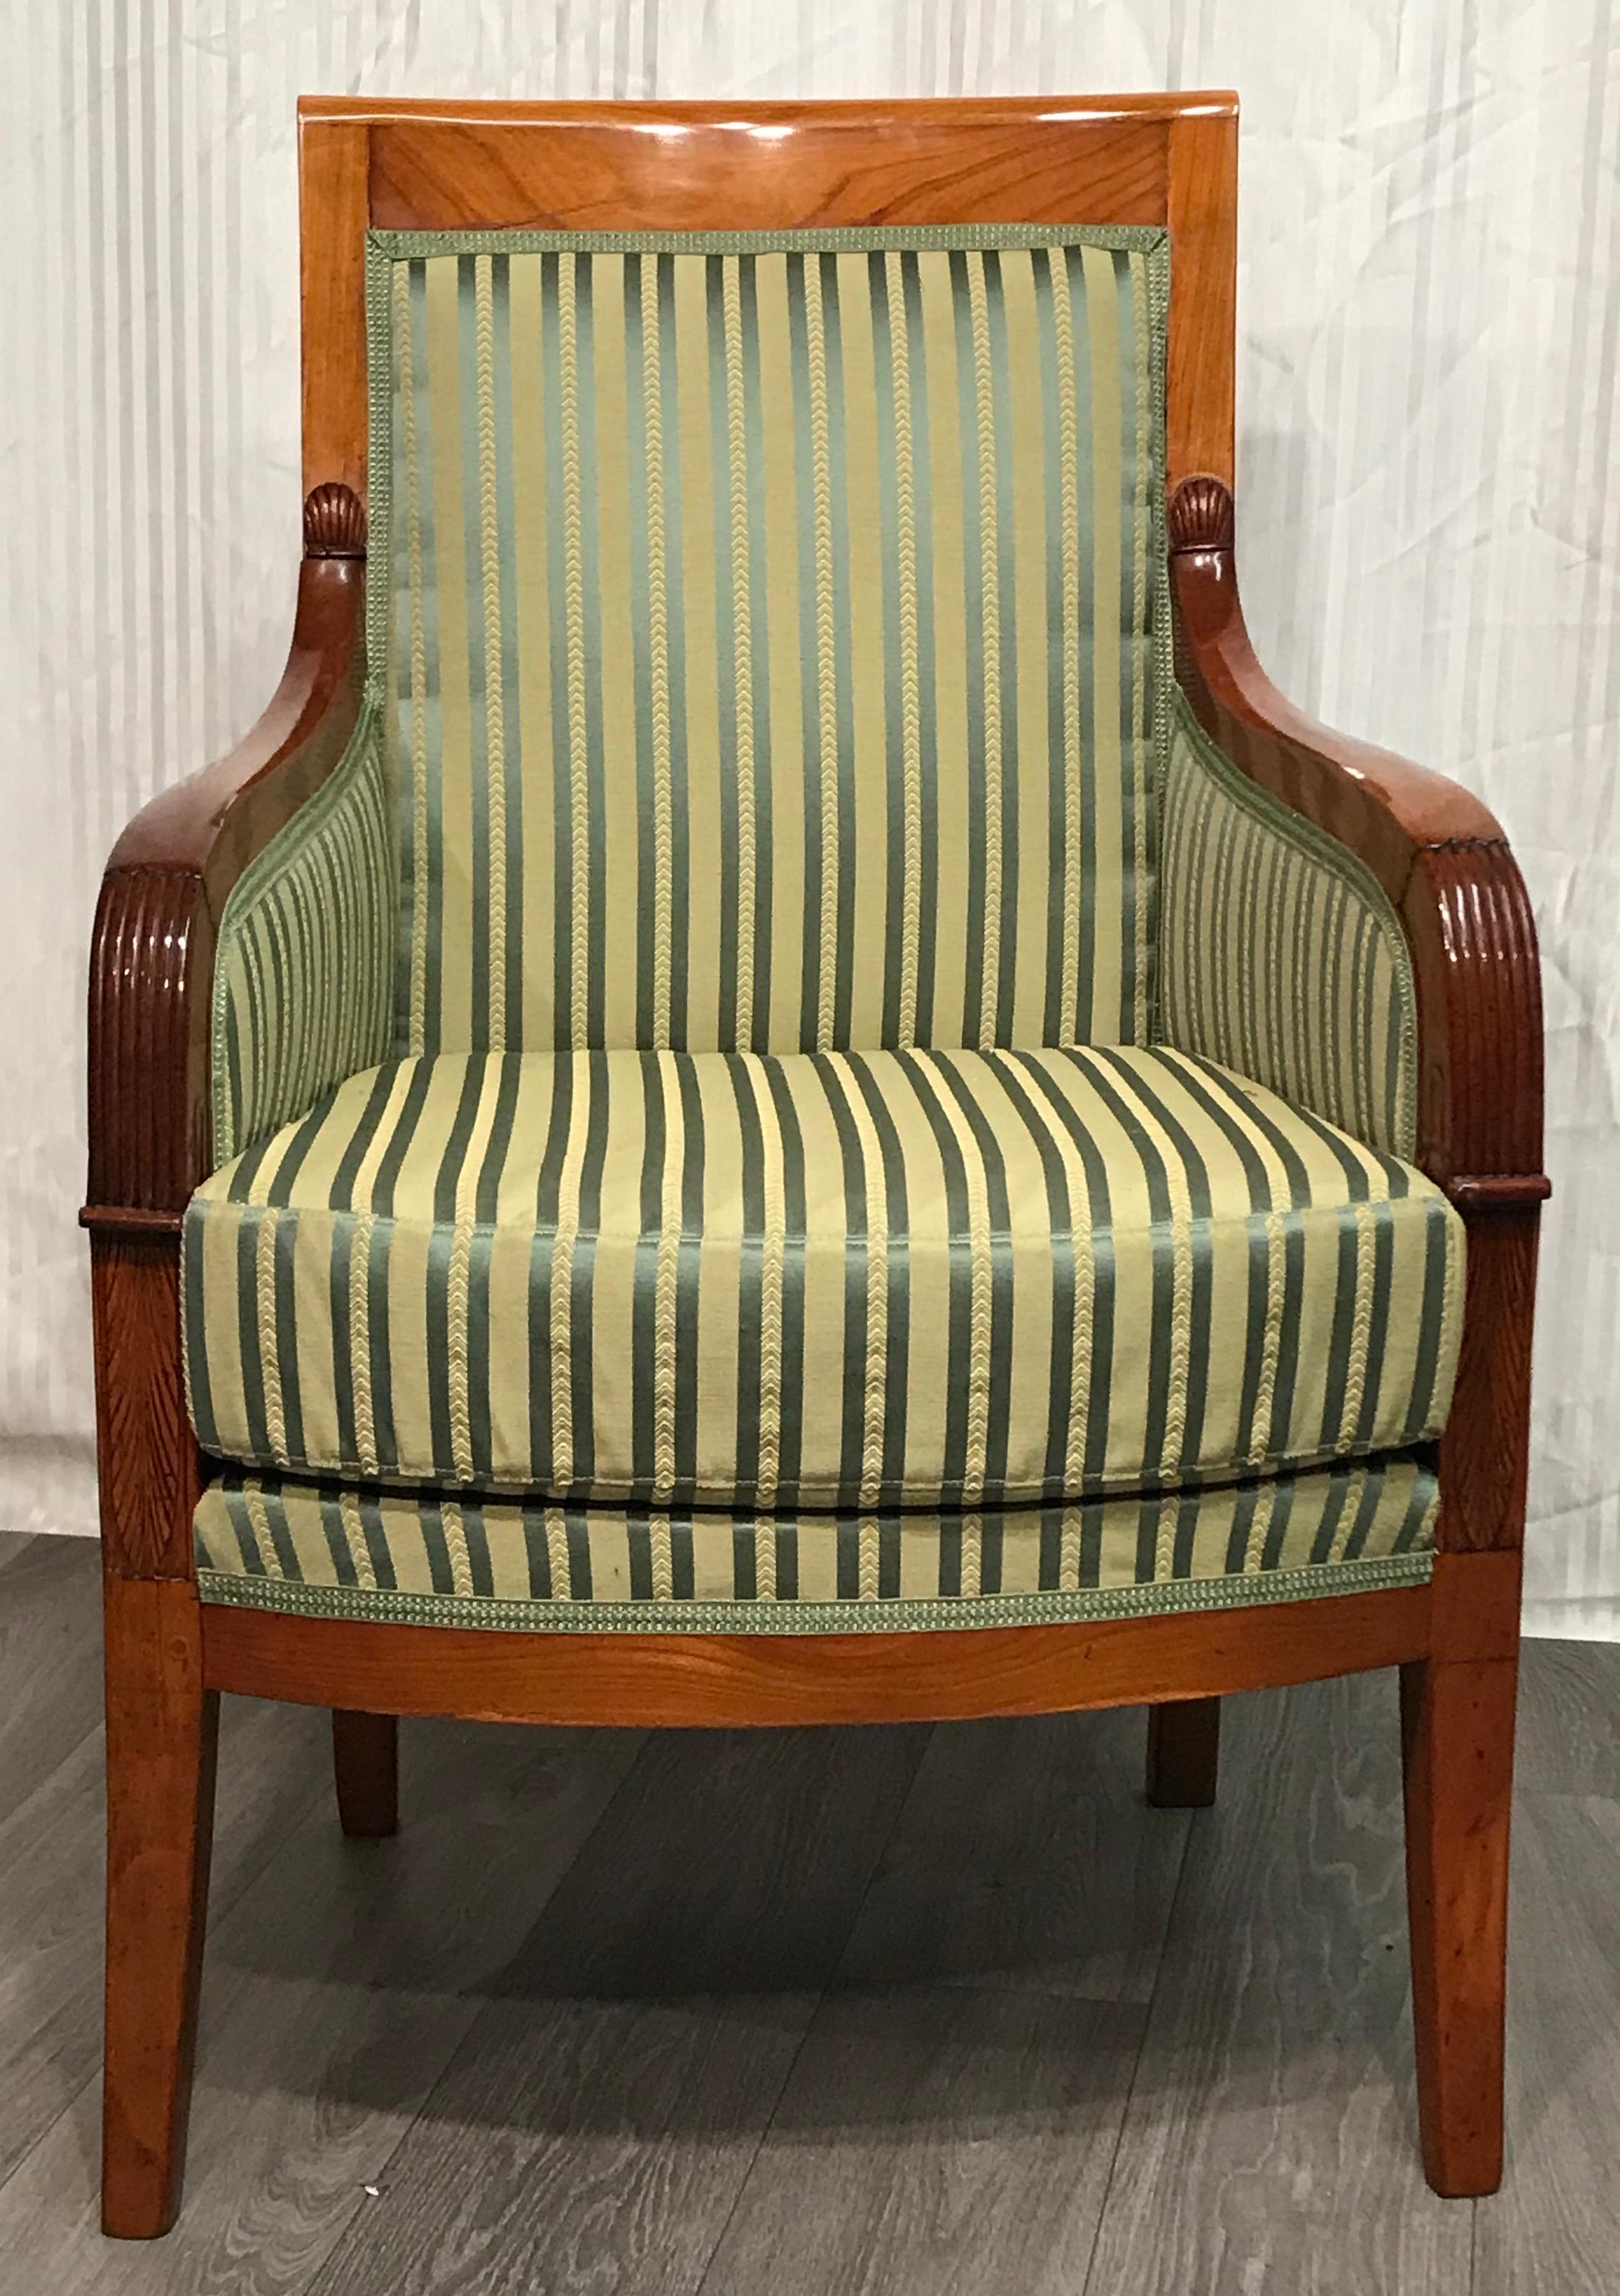 French Directoire armchair, France early 19th century, cherry veneer.
This elegant armchair stands out for its very pretty hand carved ornaments, which shows the attention and the love for every single detail of the 18th and 19th century furniture